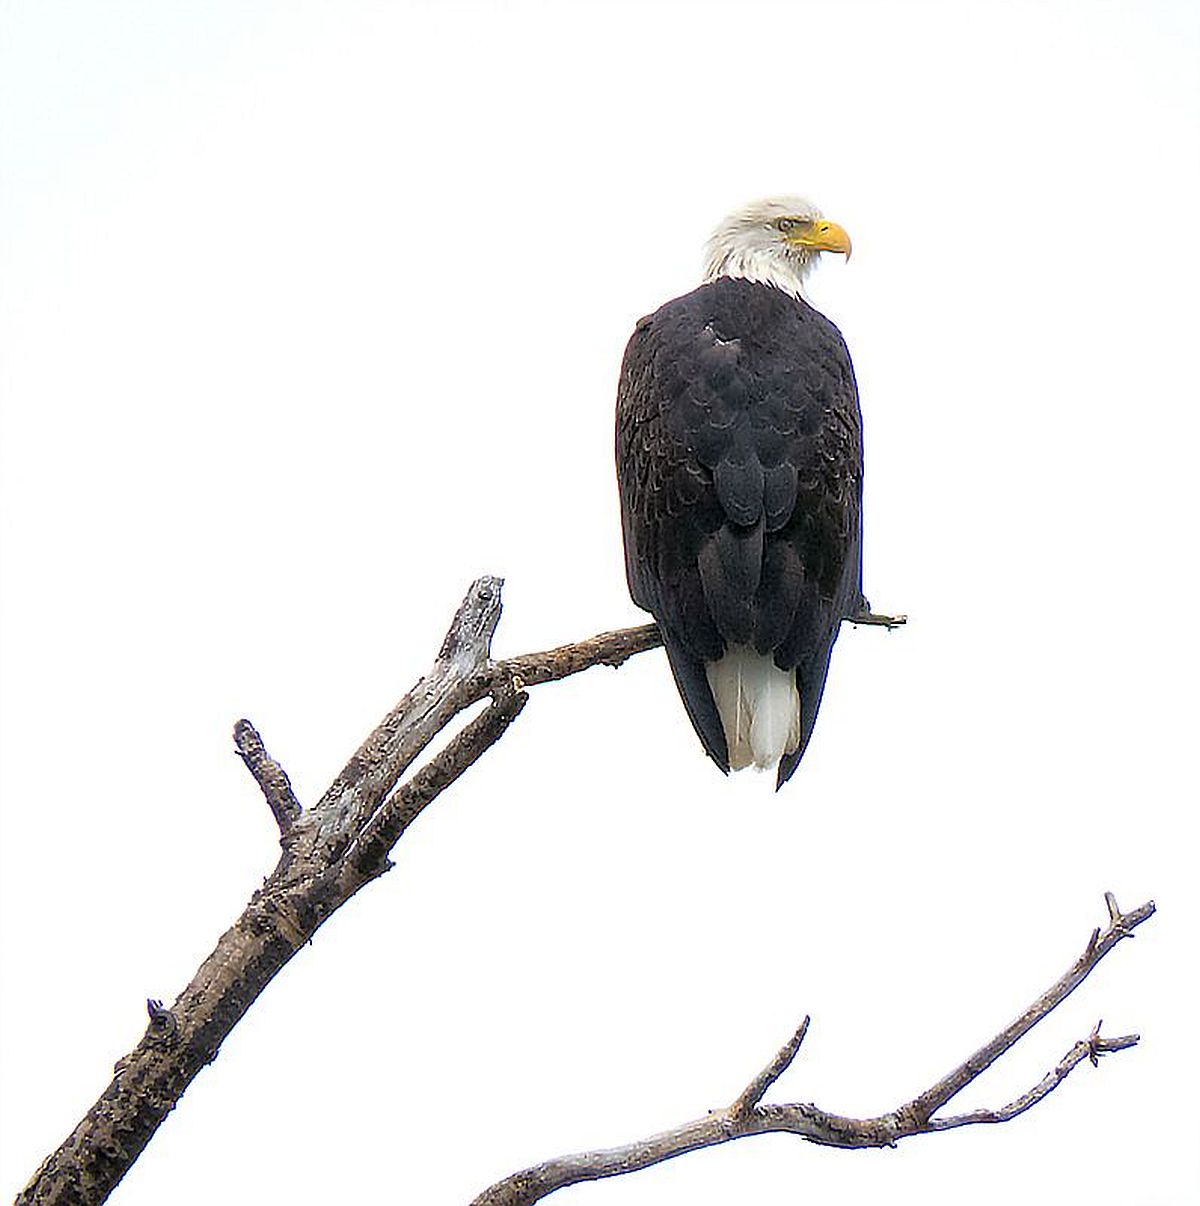 A large bird with black body, white head and hooked yellow beak perched on a tree limb